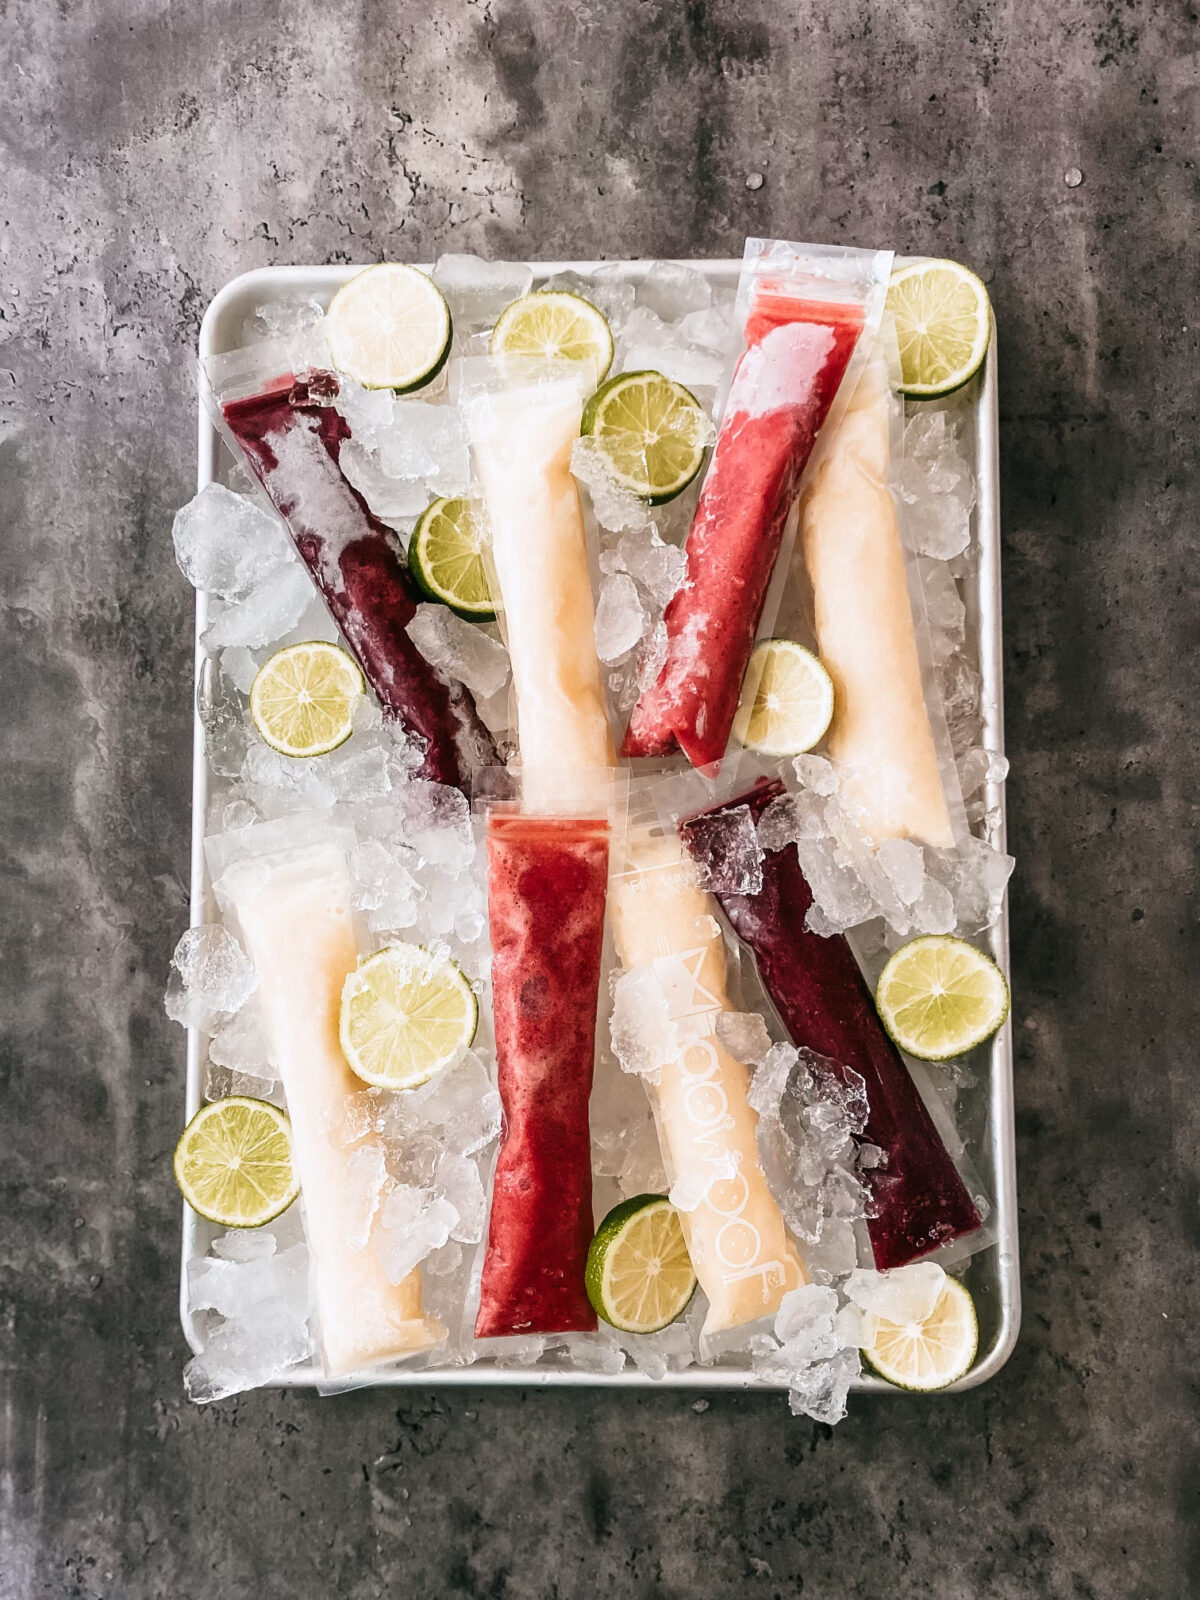 Homemade freezer pops on a tray of ice with sliced limes.